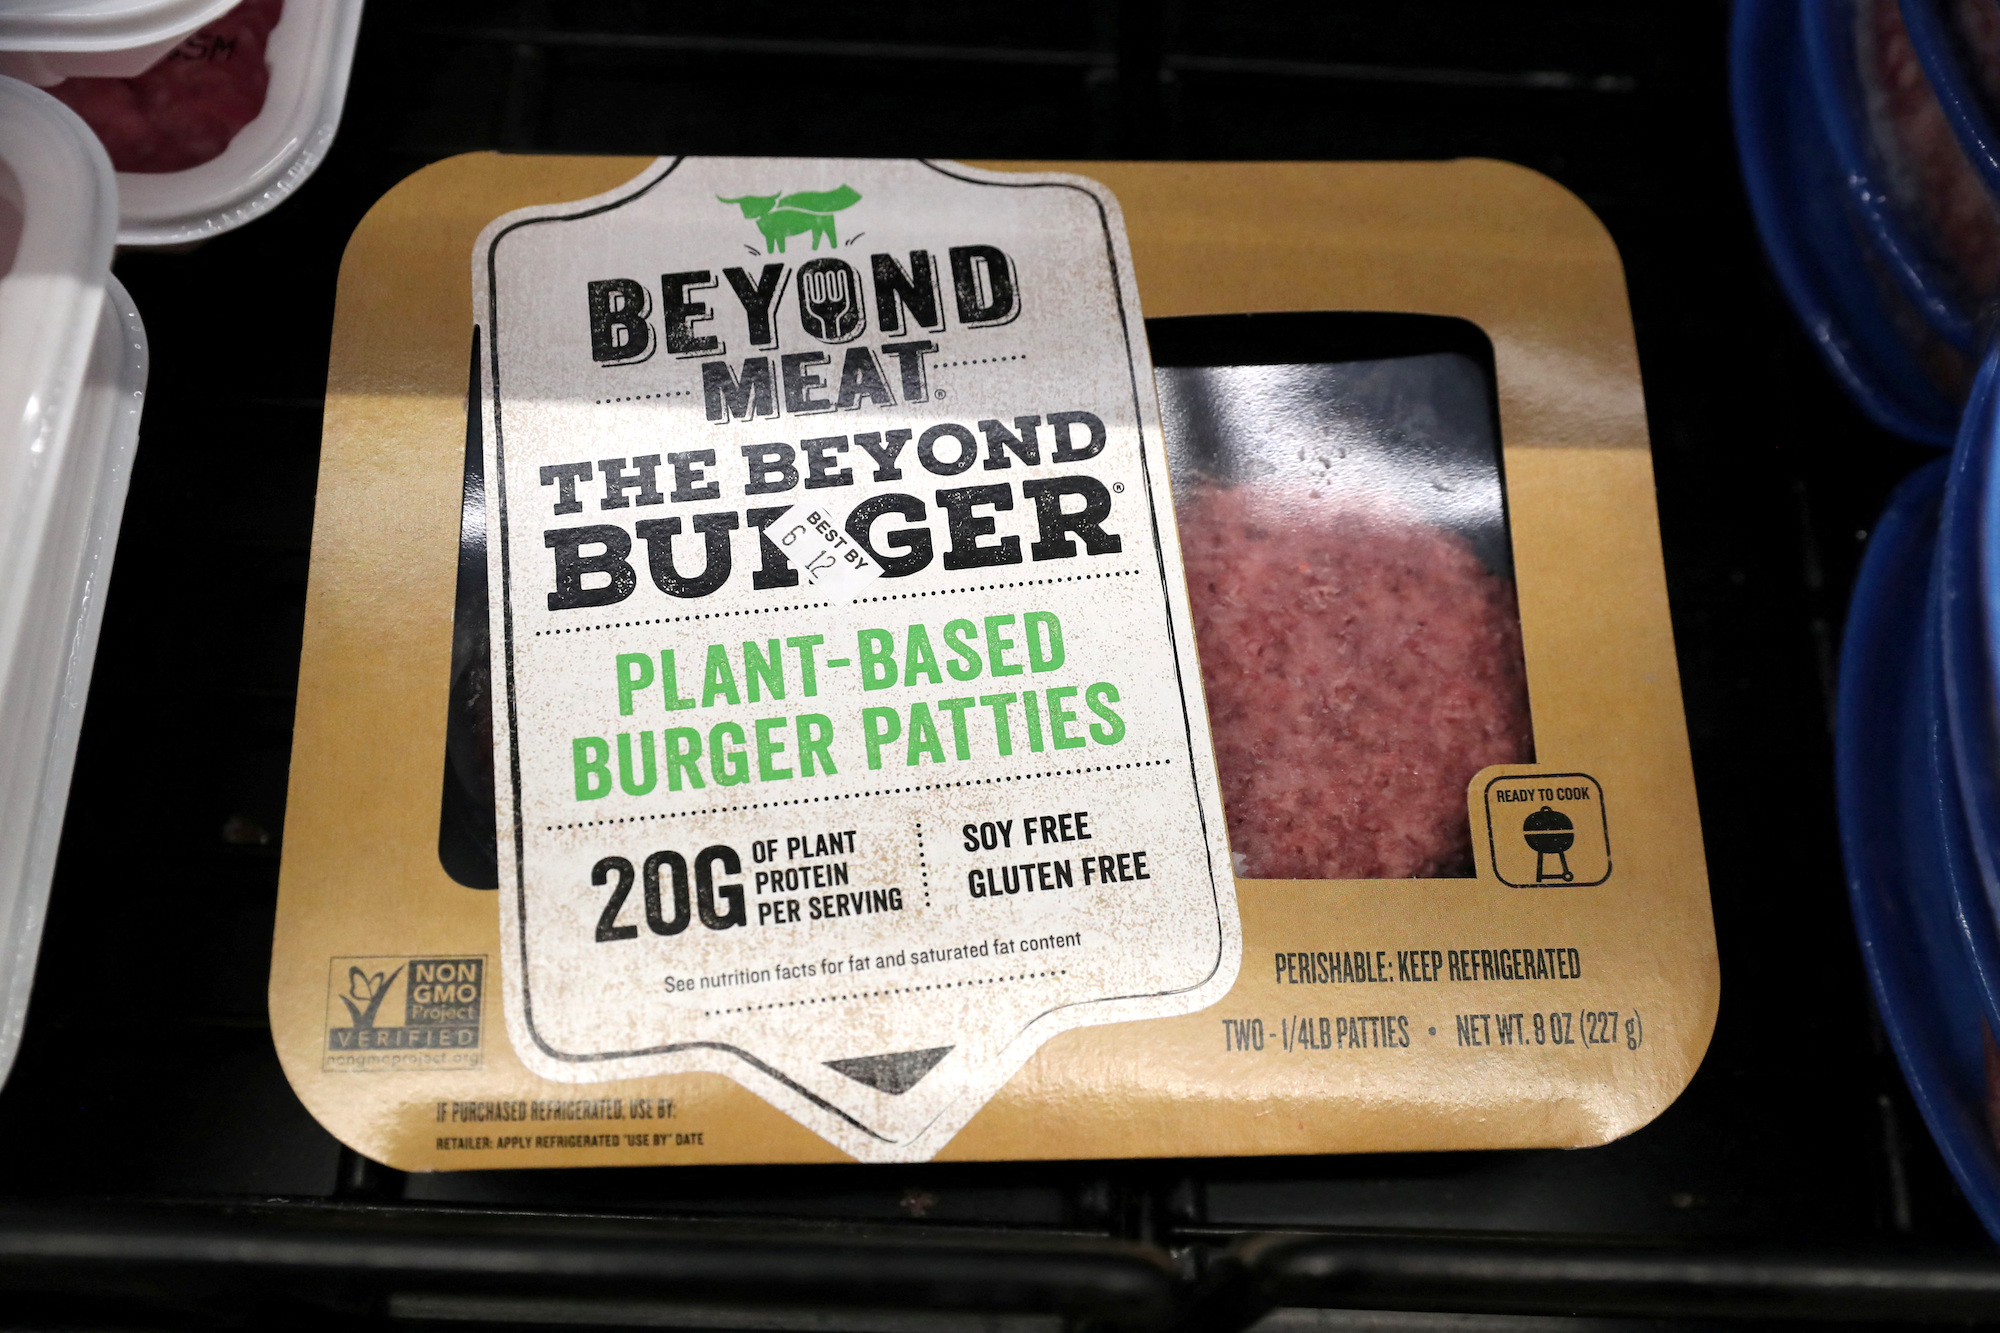 FILE PHOTO: A Beyond Meat Burger is seen on display at a store in Port Washington, New York, U.S., June 3, 2019